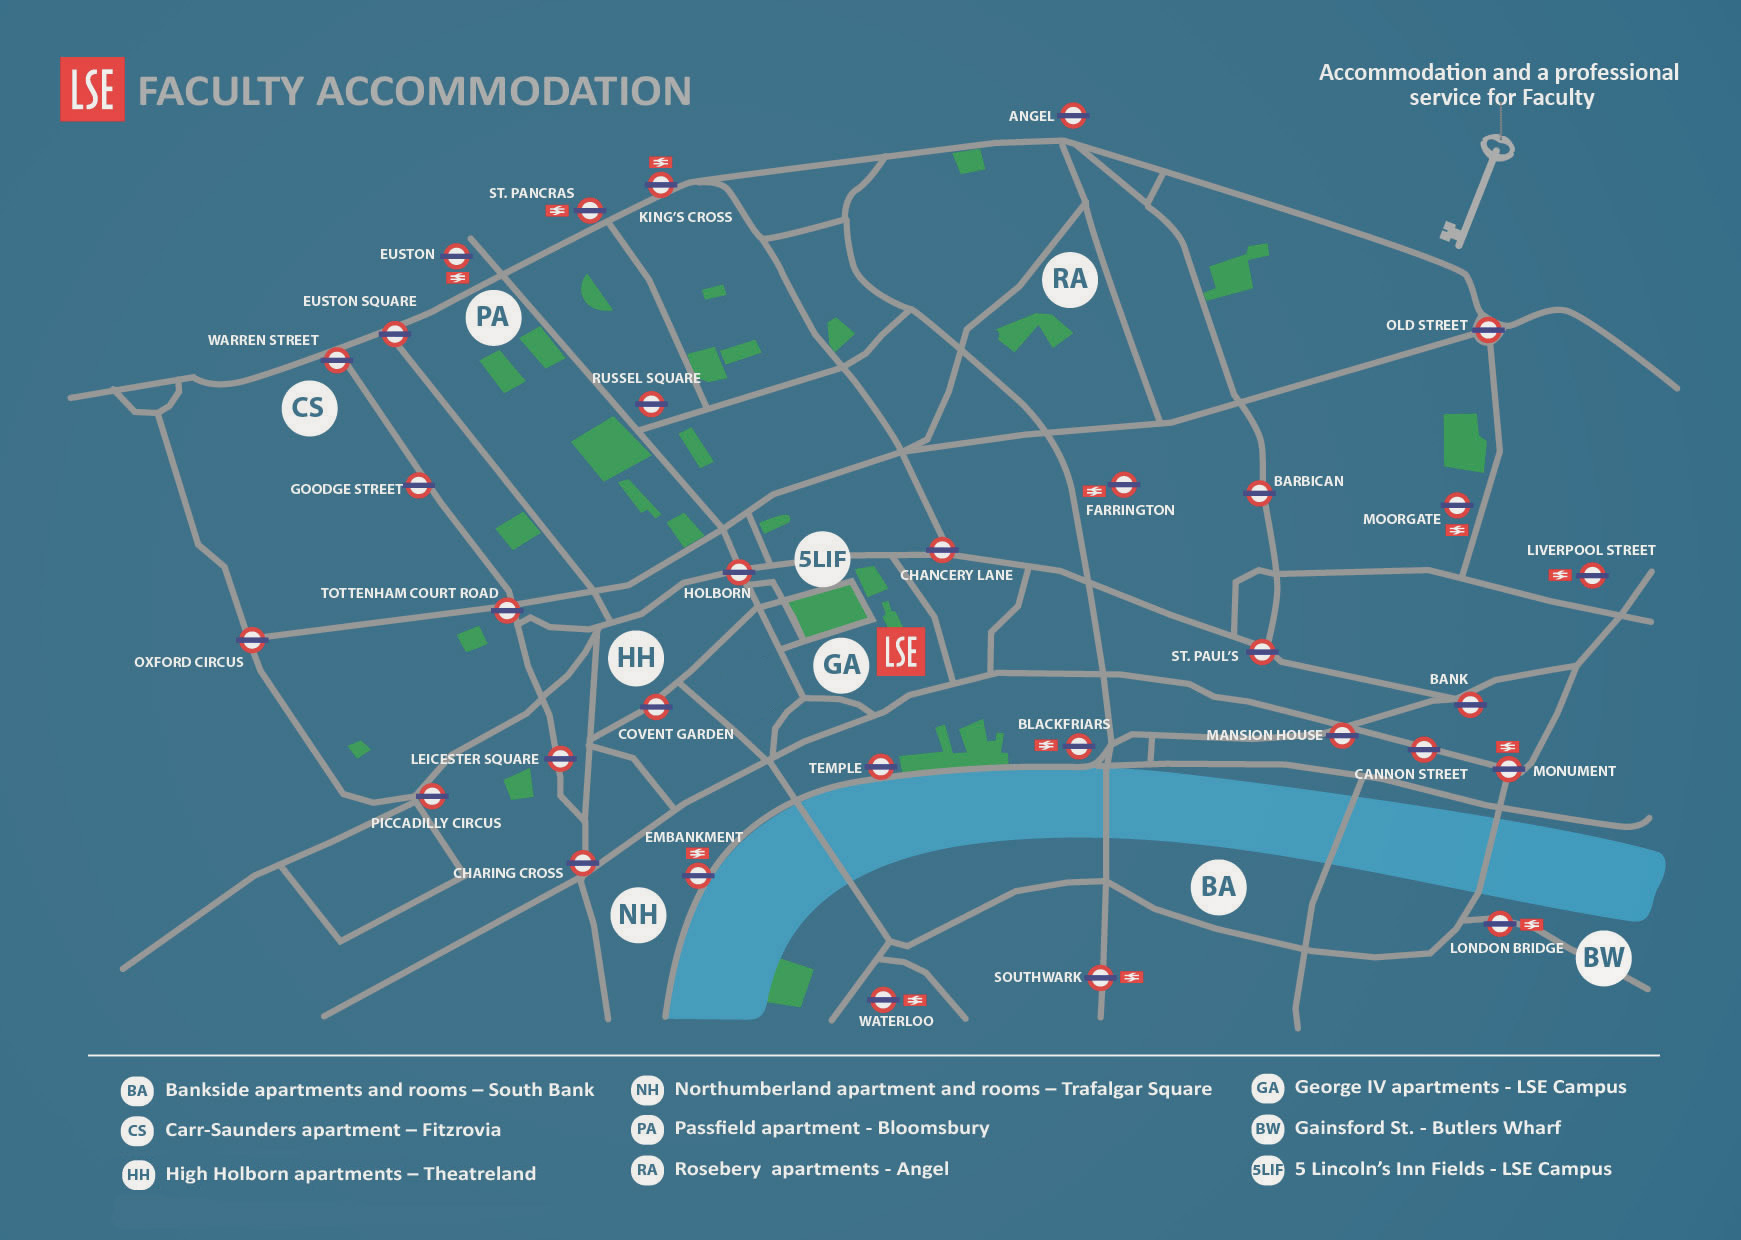 faculty-accommodation-map-full-size